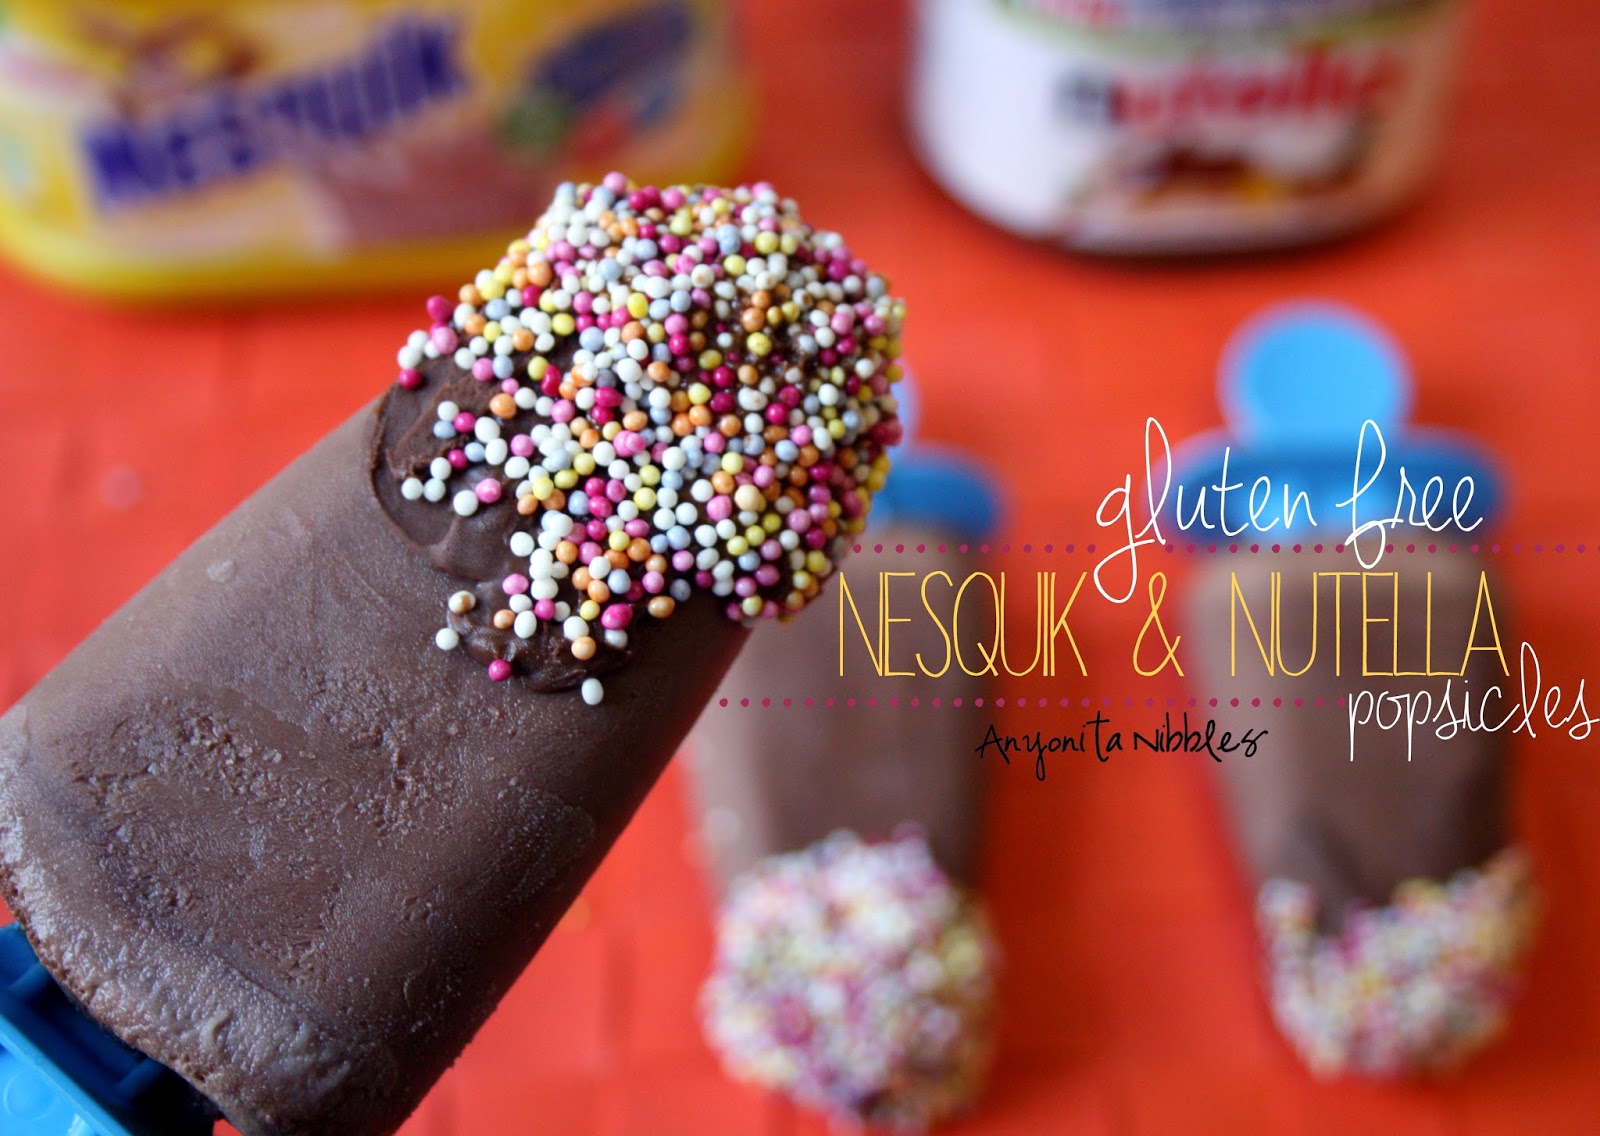 http://www.anyonita-nibbles.co.uk/2013/07/nesquick-nutella-popsicles.html